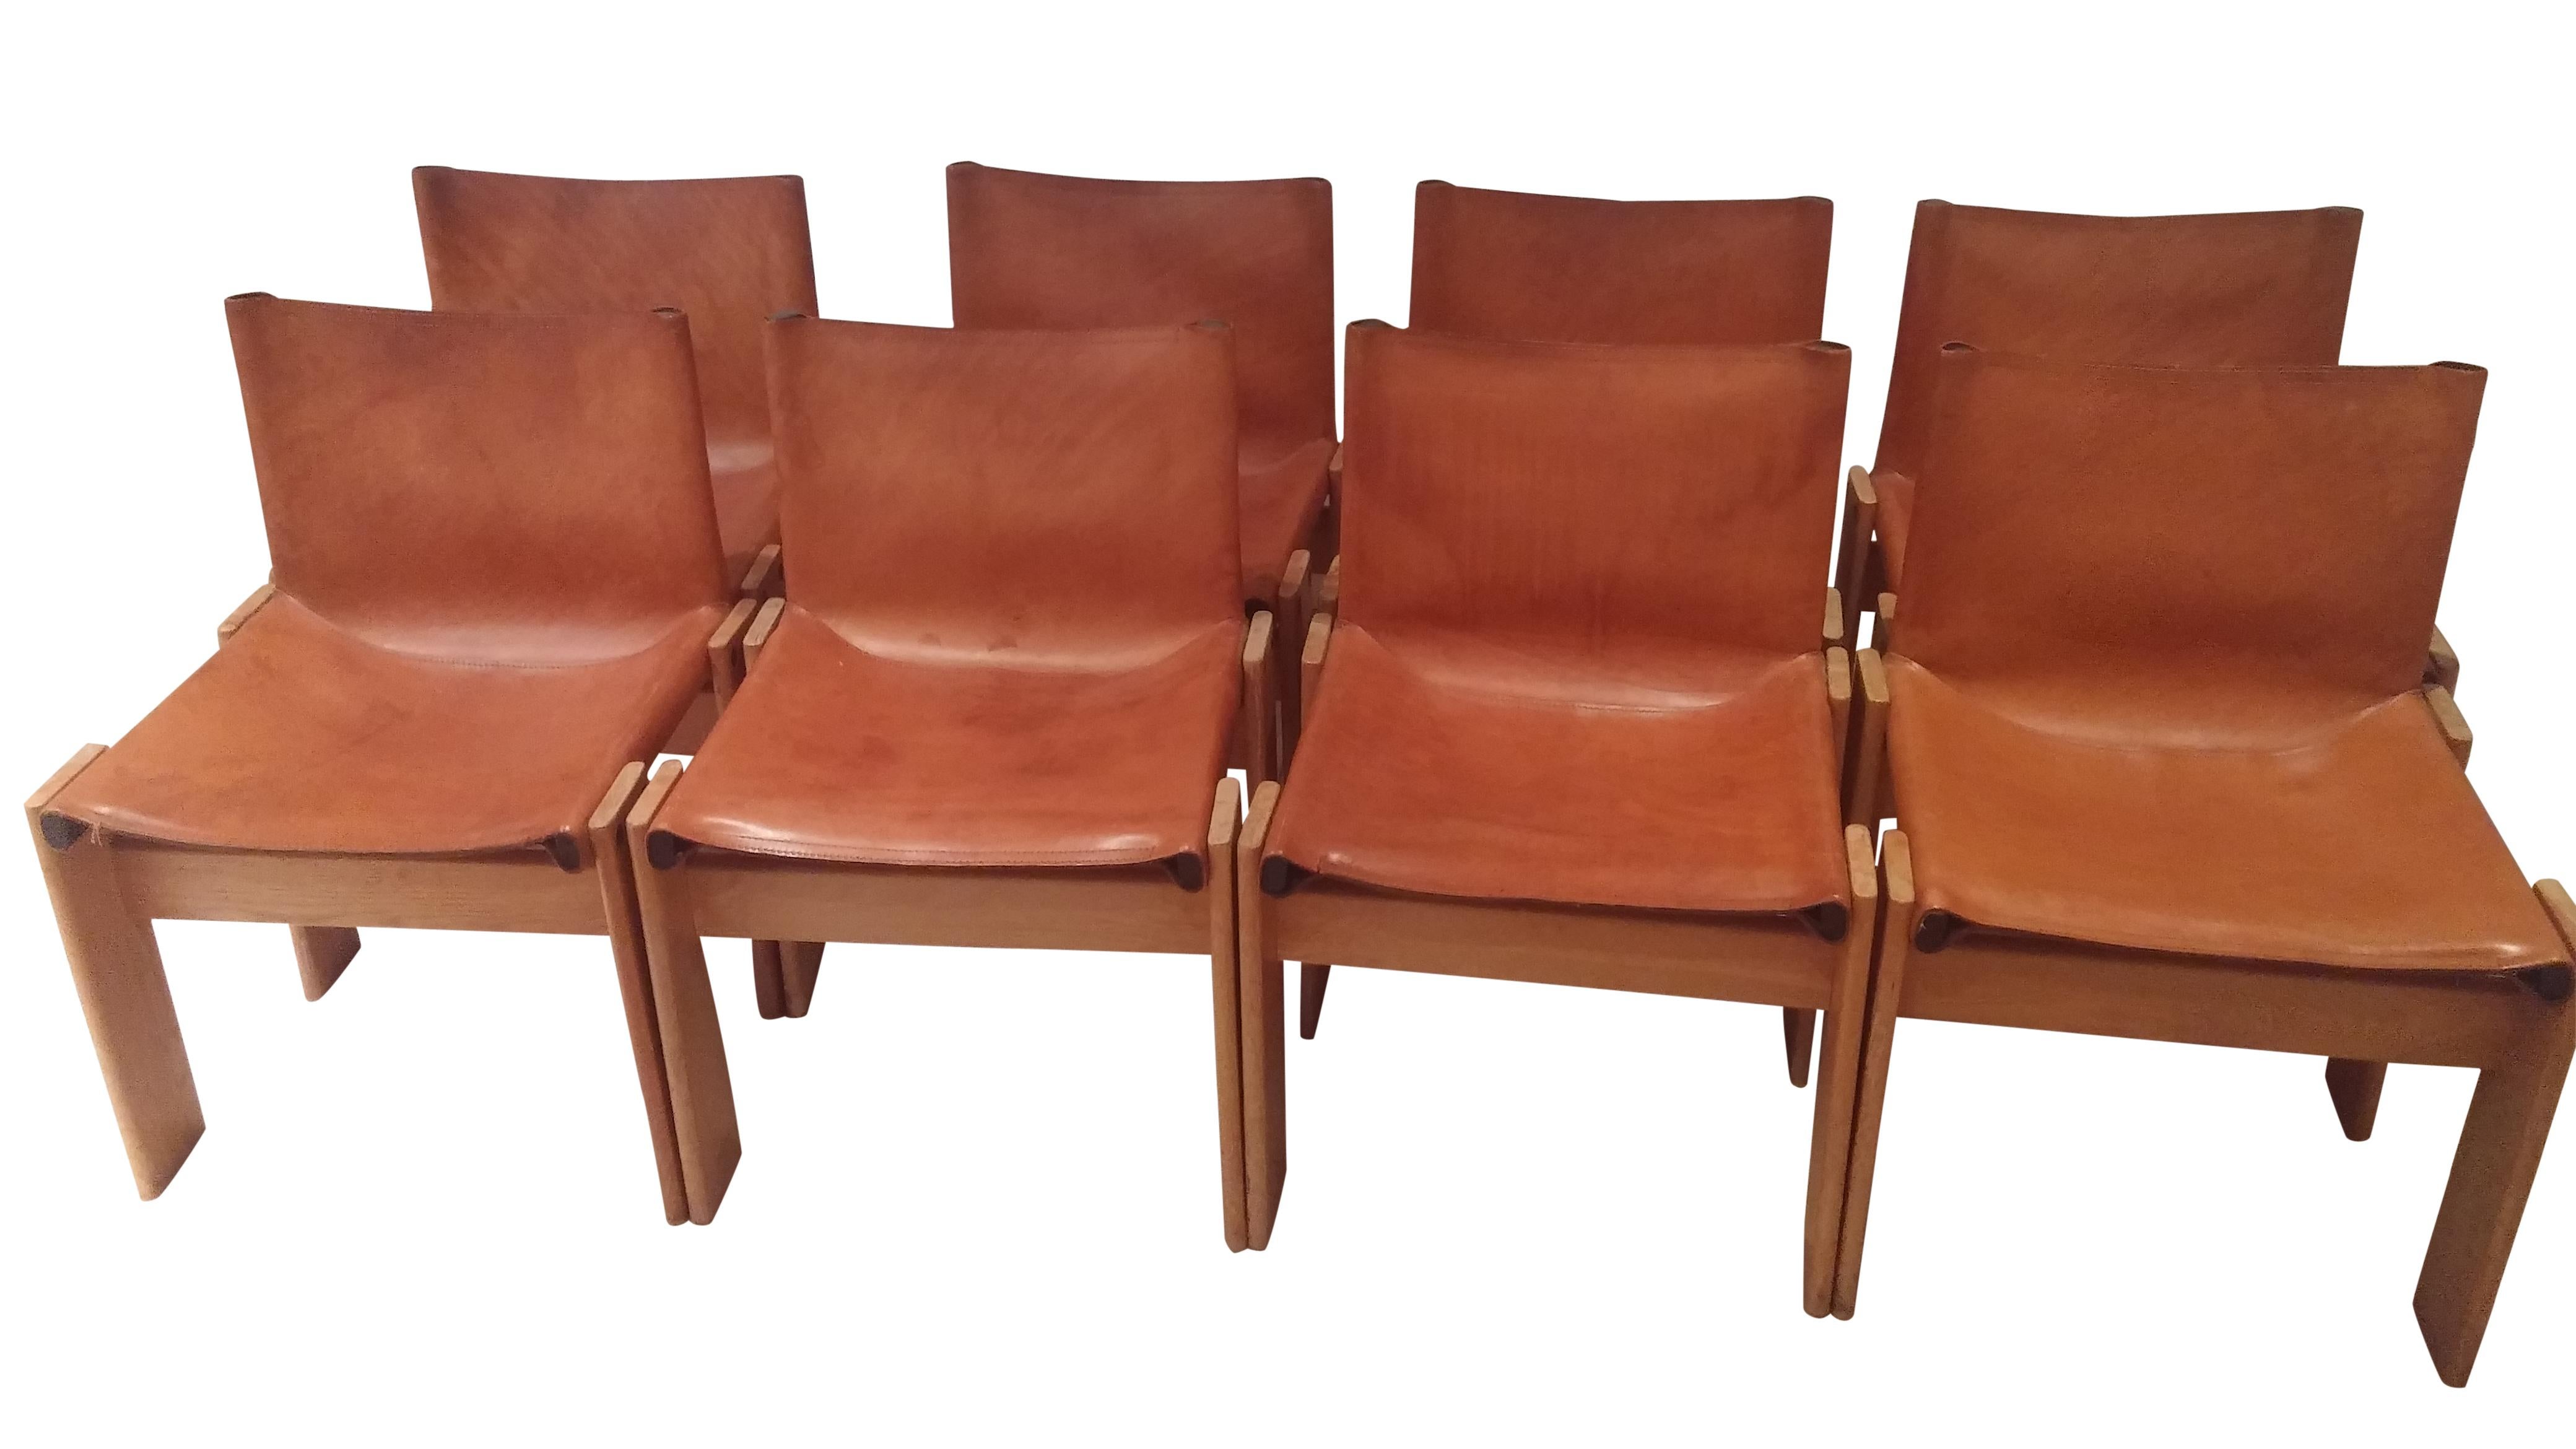 Set of 8 'Monk' chairs designed by Afra & Tobia Scarpa in 1974 & manufactured by Molteni.

These timeless and elegant chairs are made of a walnut wooden frame with fine cognac leather seat and backrests.

Good condition.

1974 - Italy

Some history